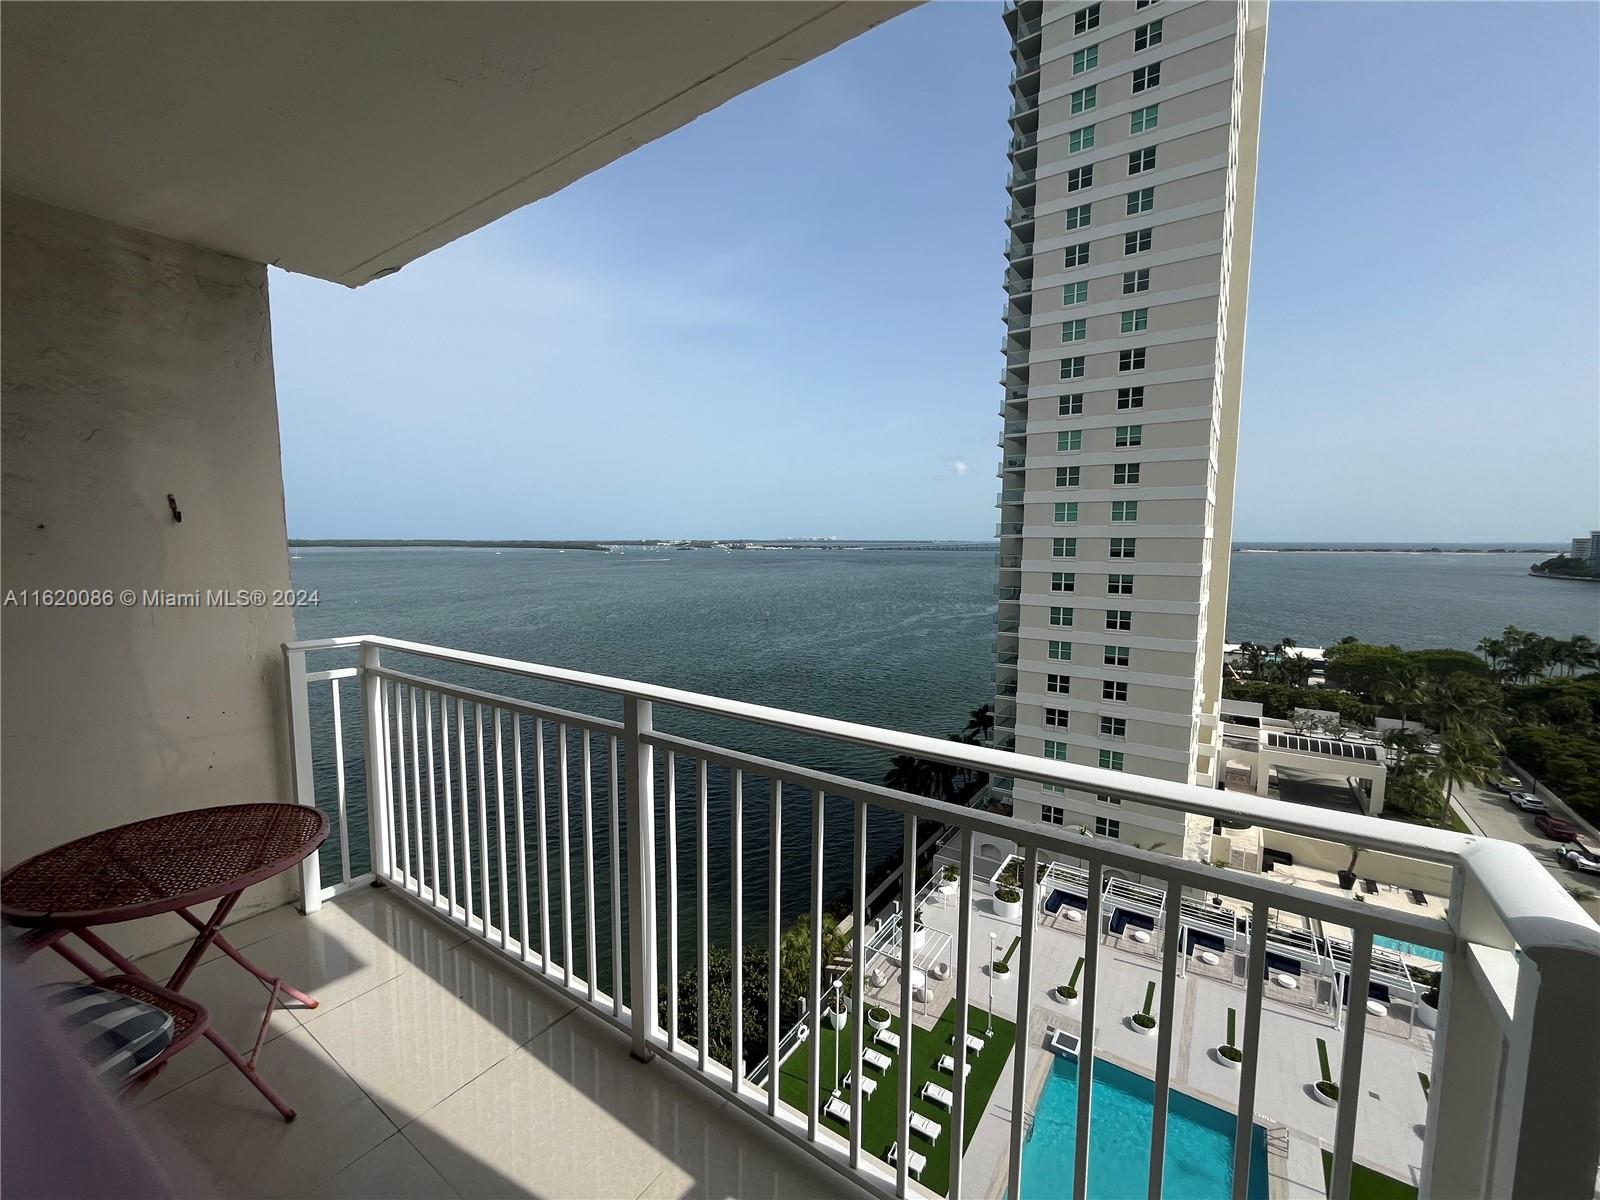 Updated two bedroom/ two bathroom unit, with a study. Porcelain, white tiles throughout, open kitchen, updated vanities in the bathrooms. South facing views of the open bay and Key Biscayne. Enjoy Isola's brand new, 4th floor amenities deck, including a pool, hot pool, BBQ's, tennis court, lounge garden, plus the gym, business center, party salon, with direct bay view. Live on exclusive Brickell Key, with an amazing 1.25 mile boardwalk, a dog park, a children's playground, and Islander market place, the Brasserie restaurant, as well as , brand new sushi restaurant. Close to the center of Brickell and Brickell City Center. Island living at its best!